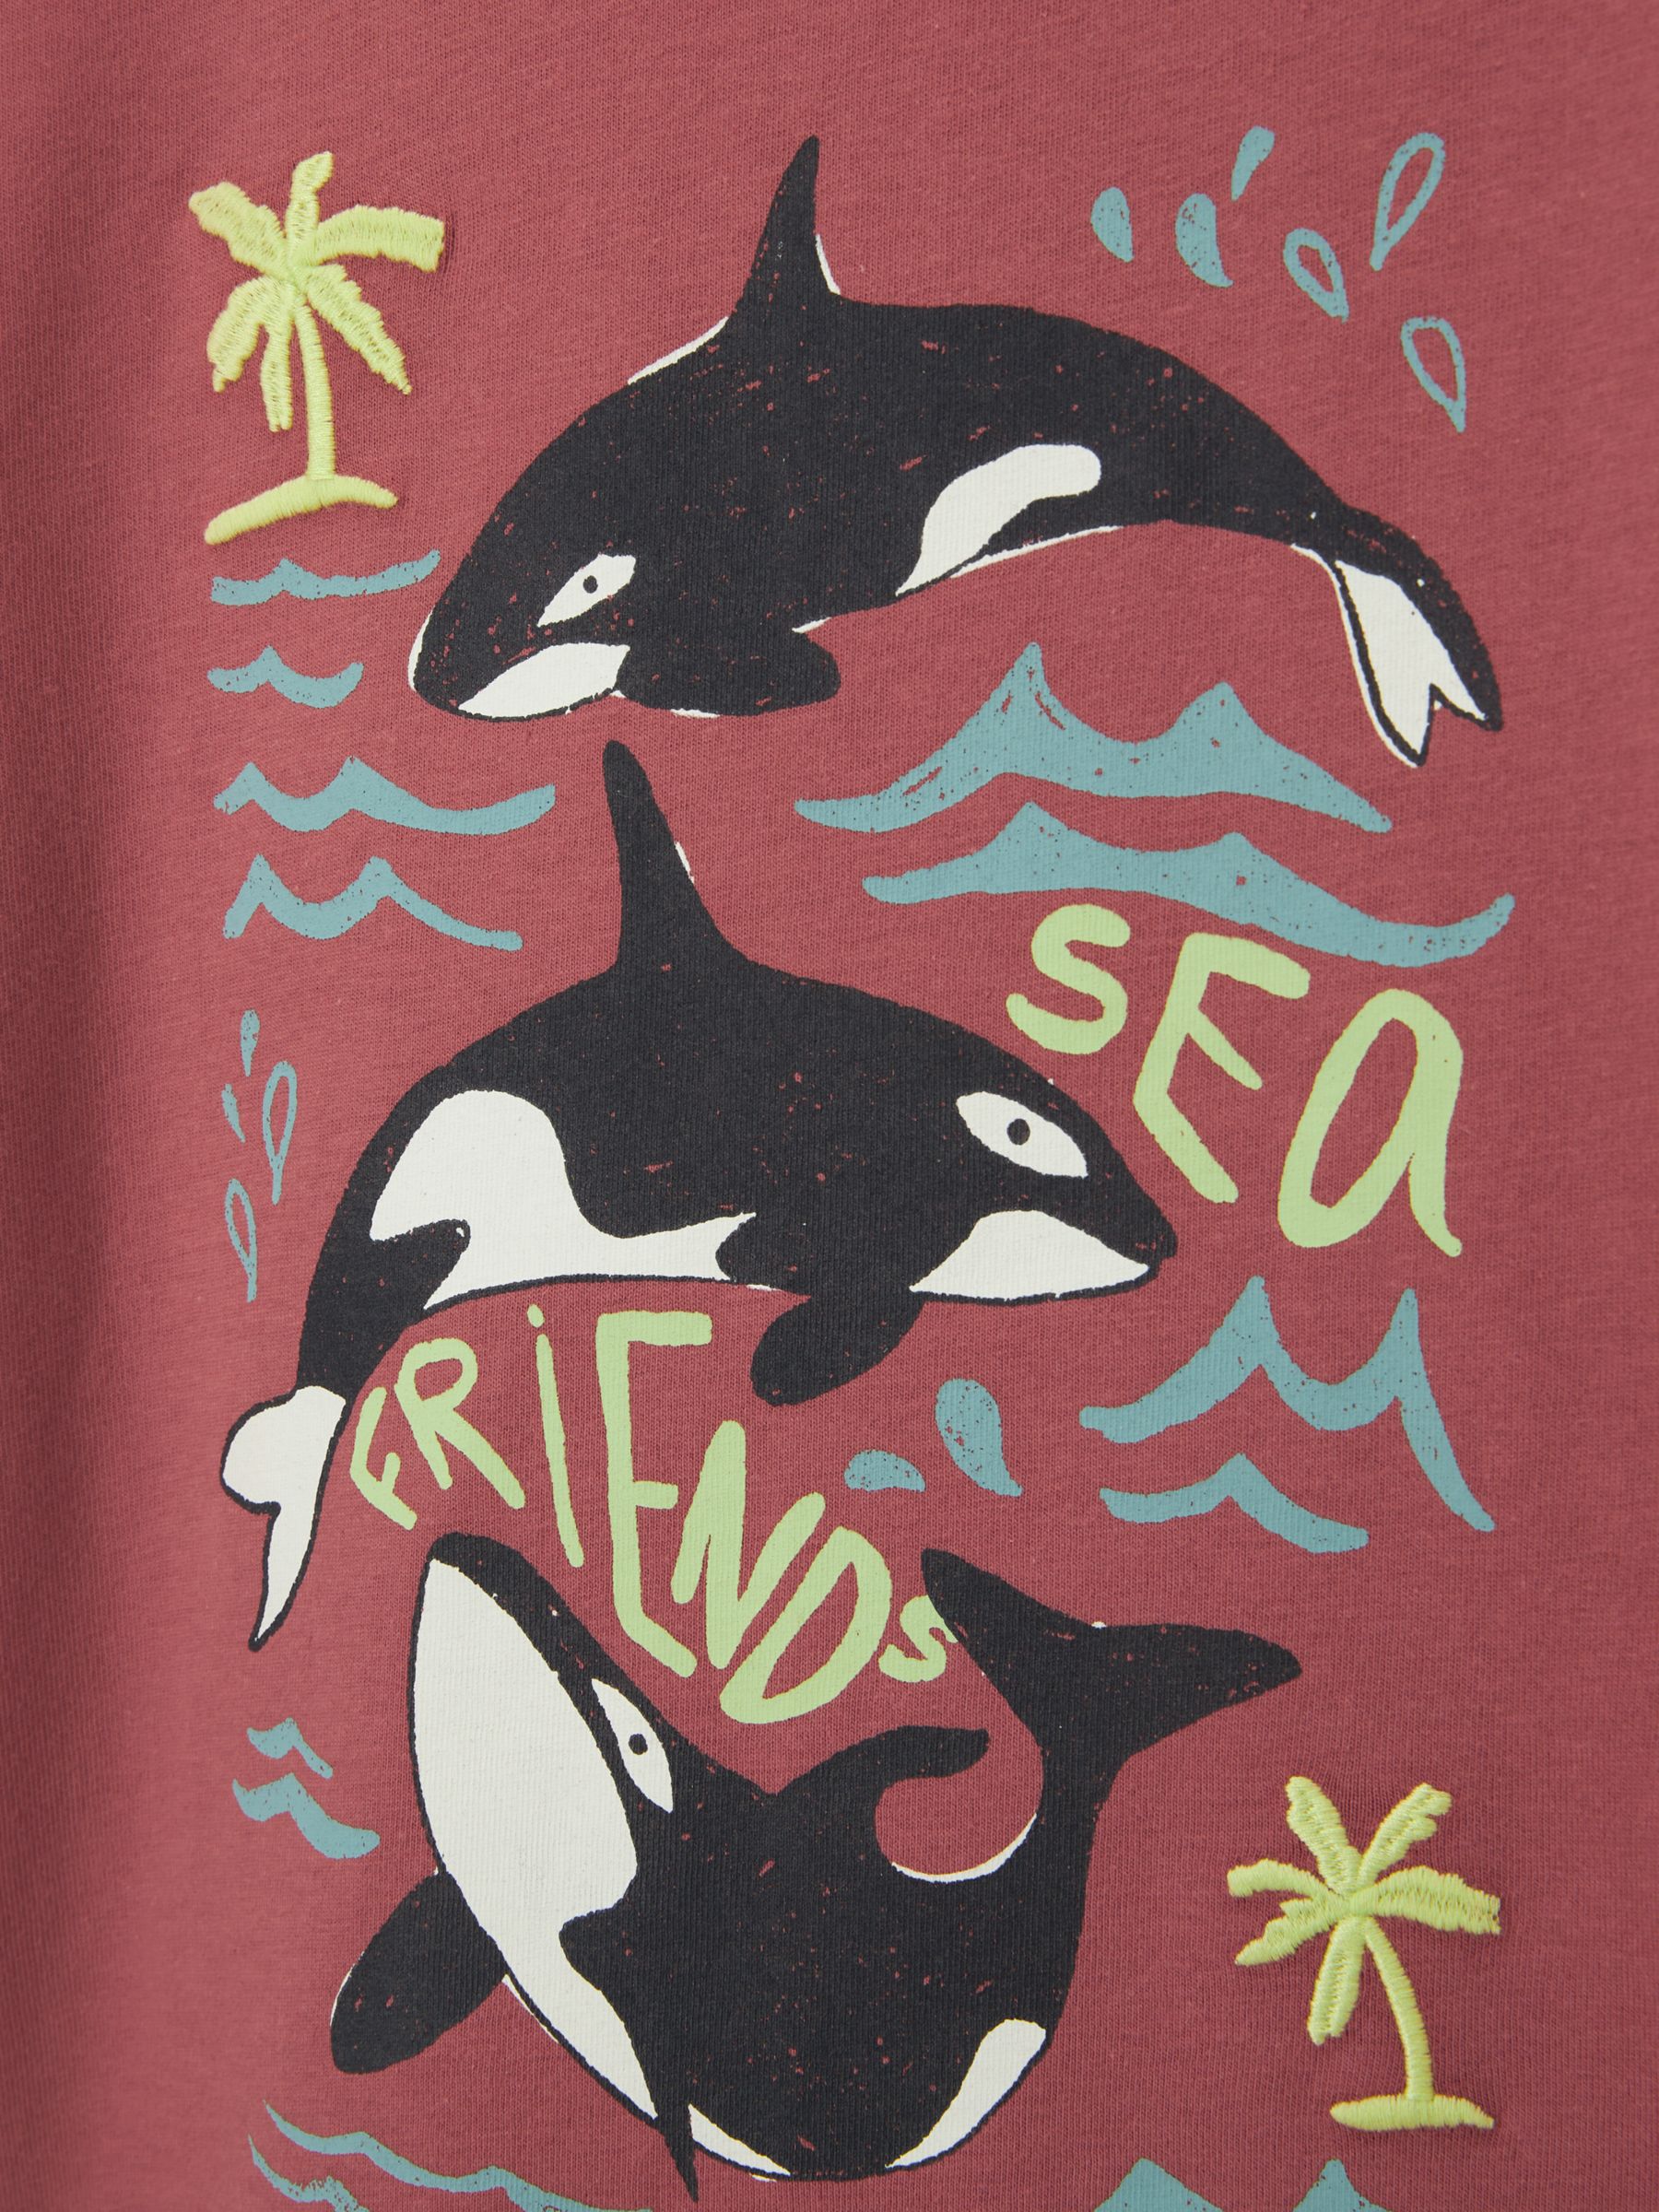 John Lewis Kids' Orca Sea Friends Graphic Print T-Shirt, Red, 9 years